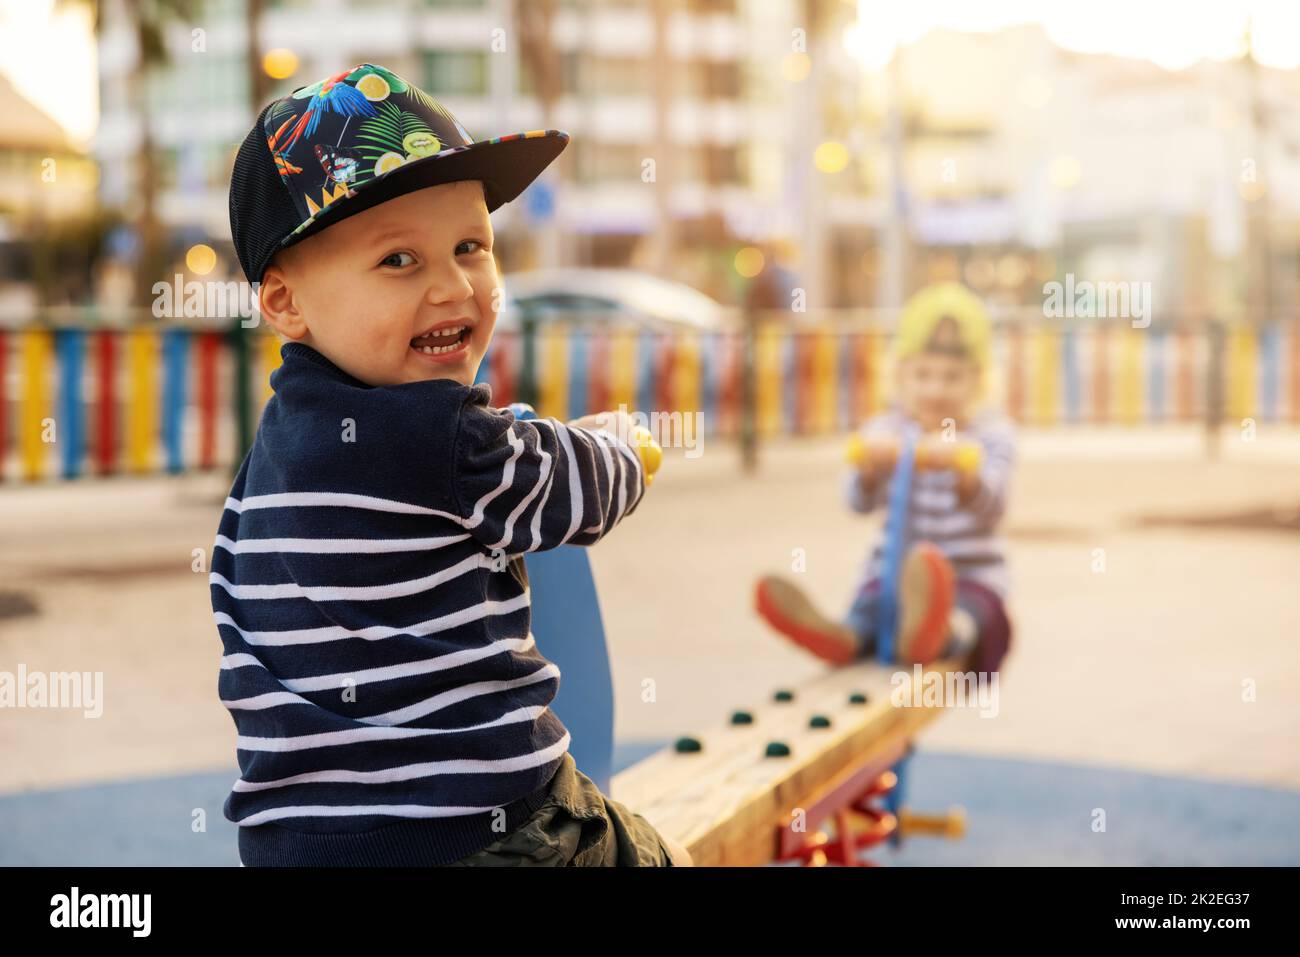 happy smiling little boy on balance swing. children playing at city playground. copy space Stock Photo